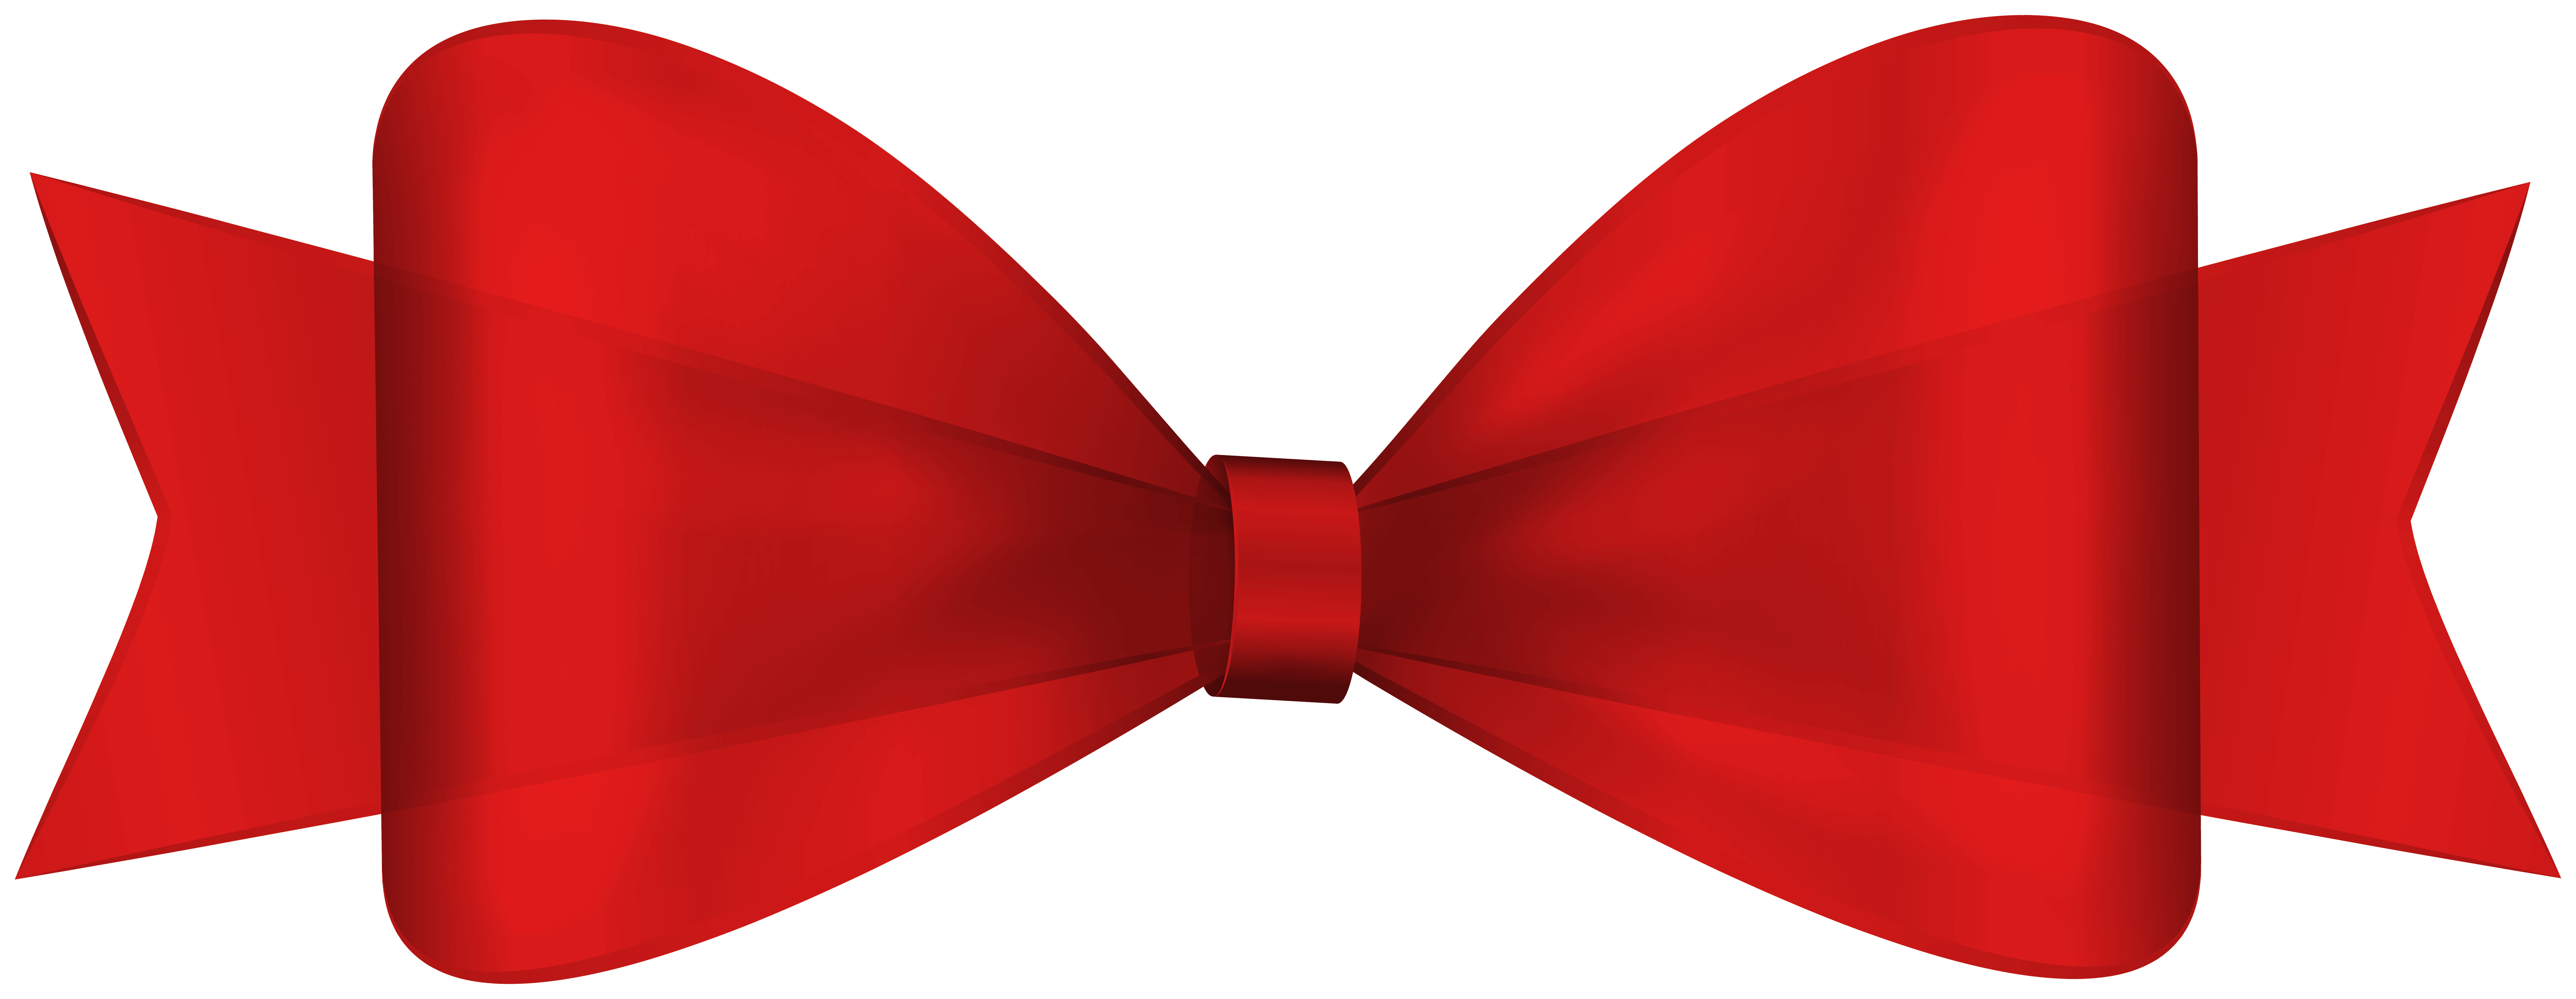 Red Bow Decor PNG Clipart | Gallery Yopriceville - High ...
